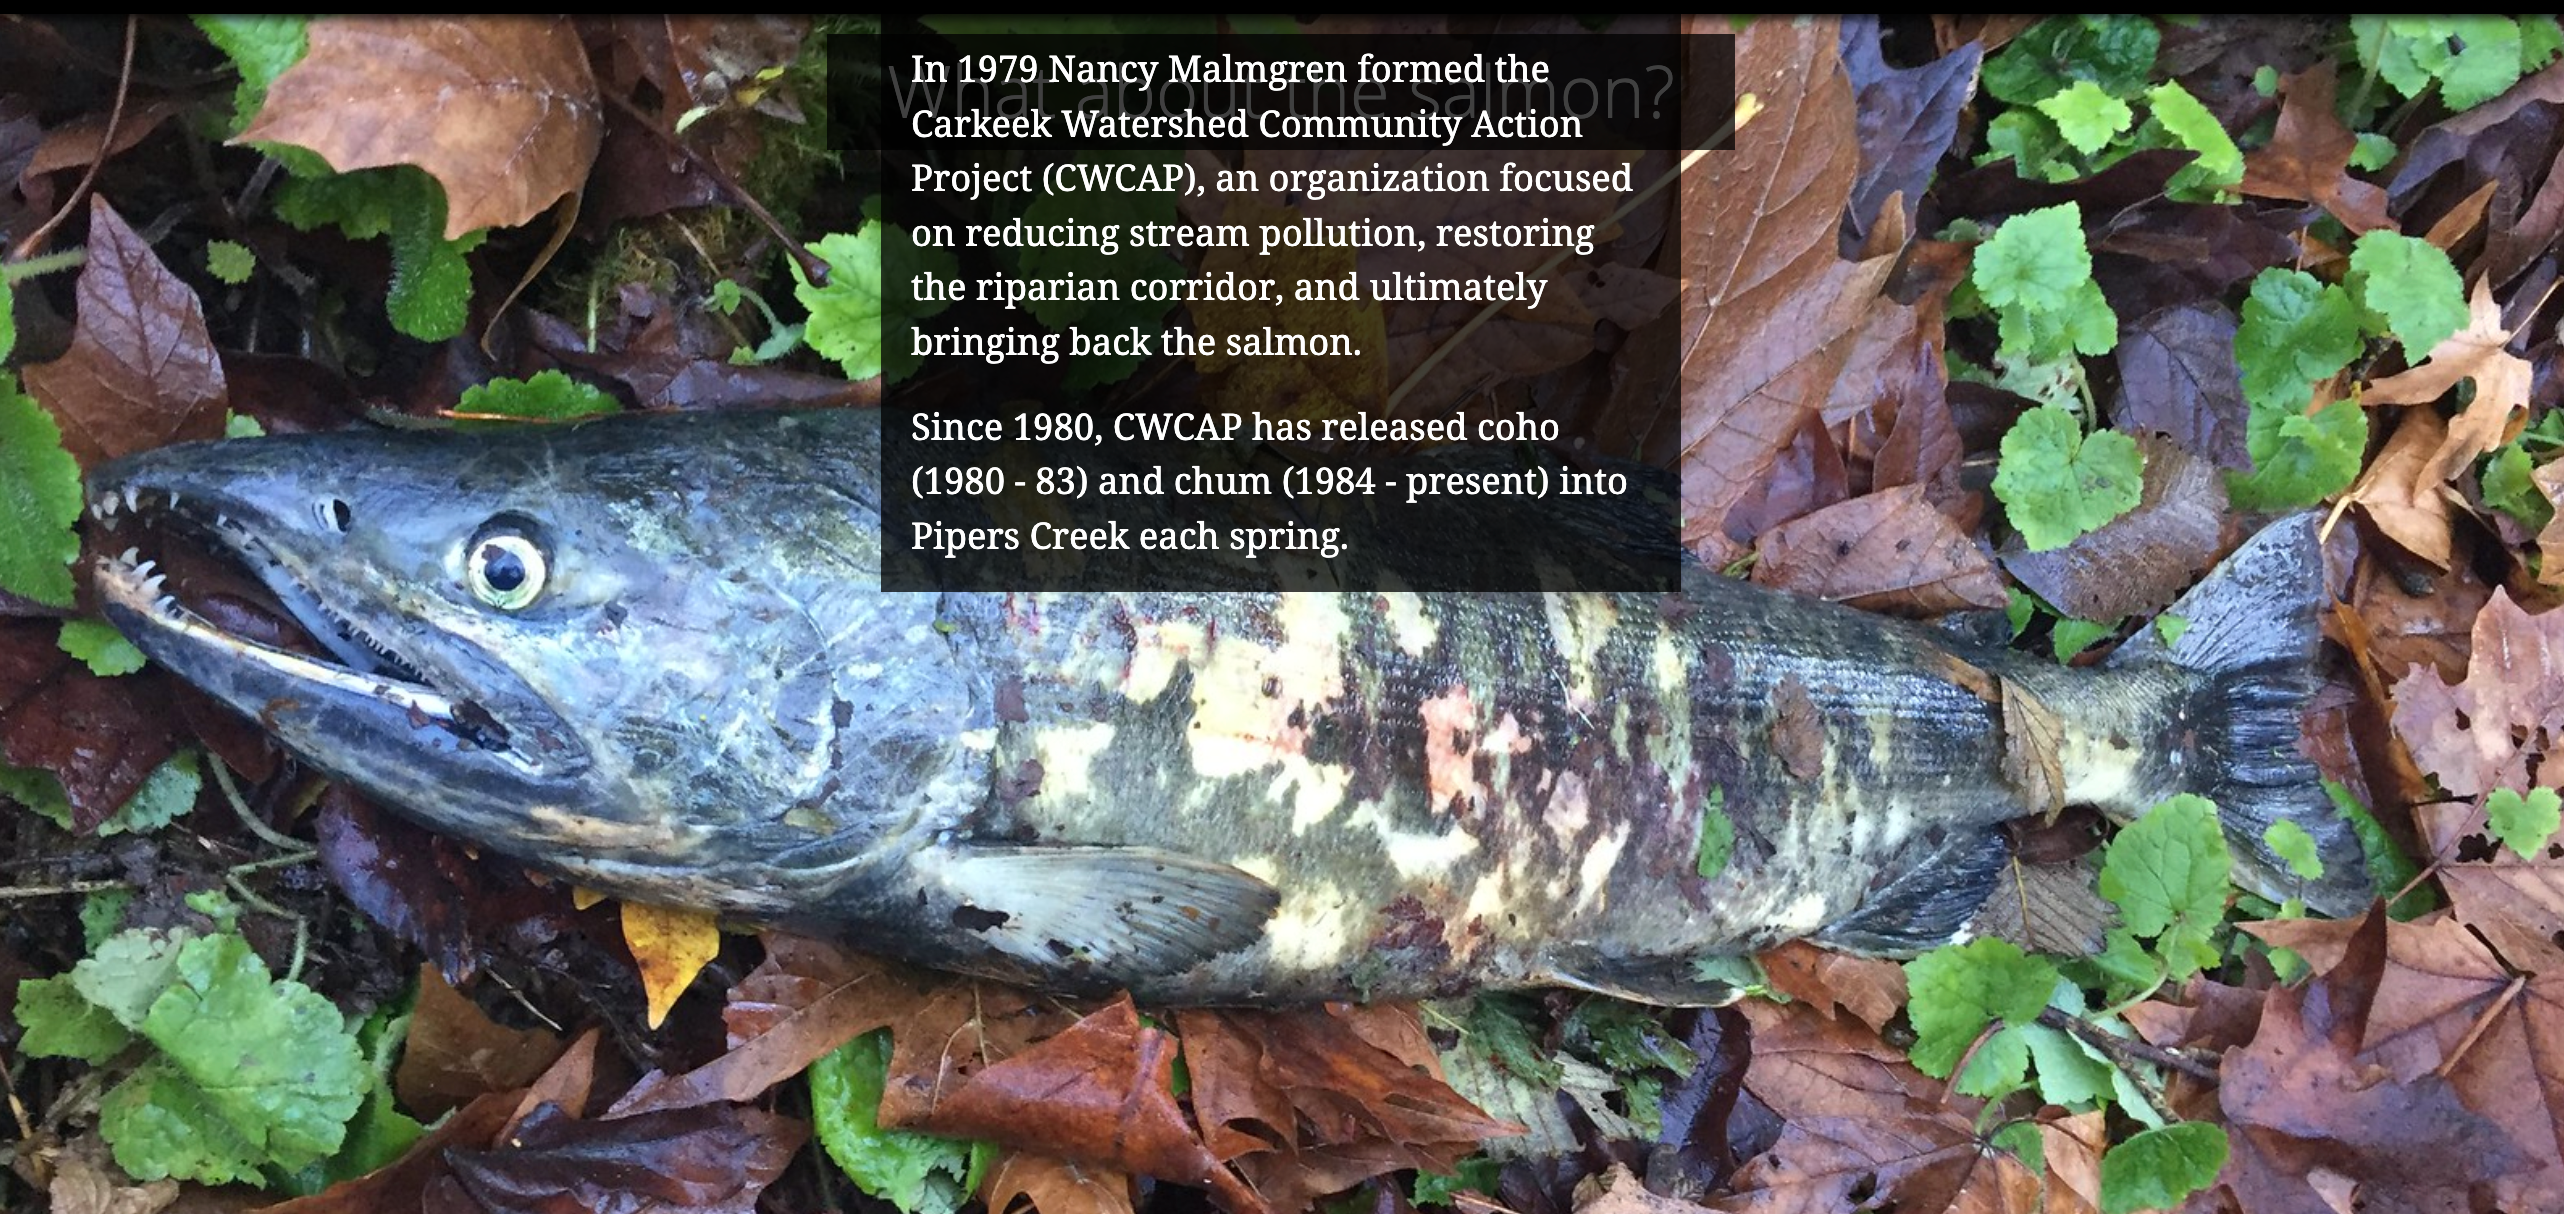 Salmon on leaves. Text: In 1979 Nany Malmgren formed teh CWCAP focused on reducing stream pollution, restoring corridor and bringing back Salmon. Since 1980 CWCAP has release Coho, Chum into Pipers Creek